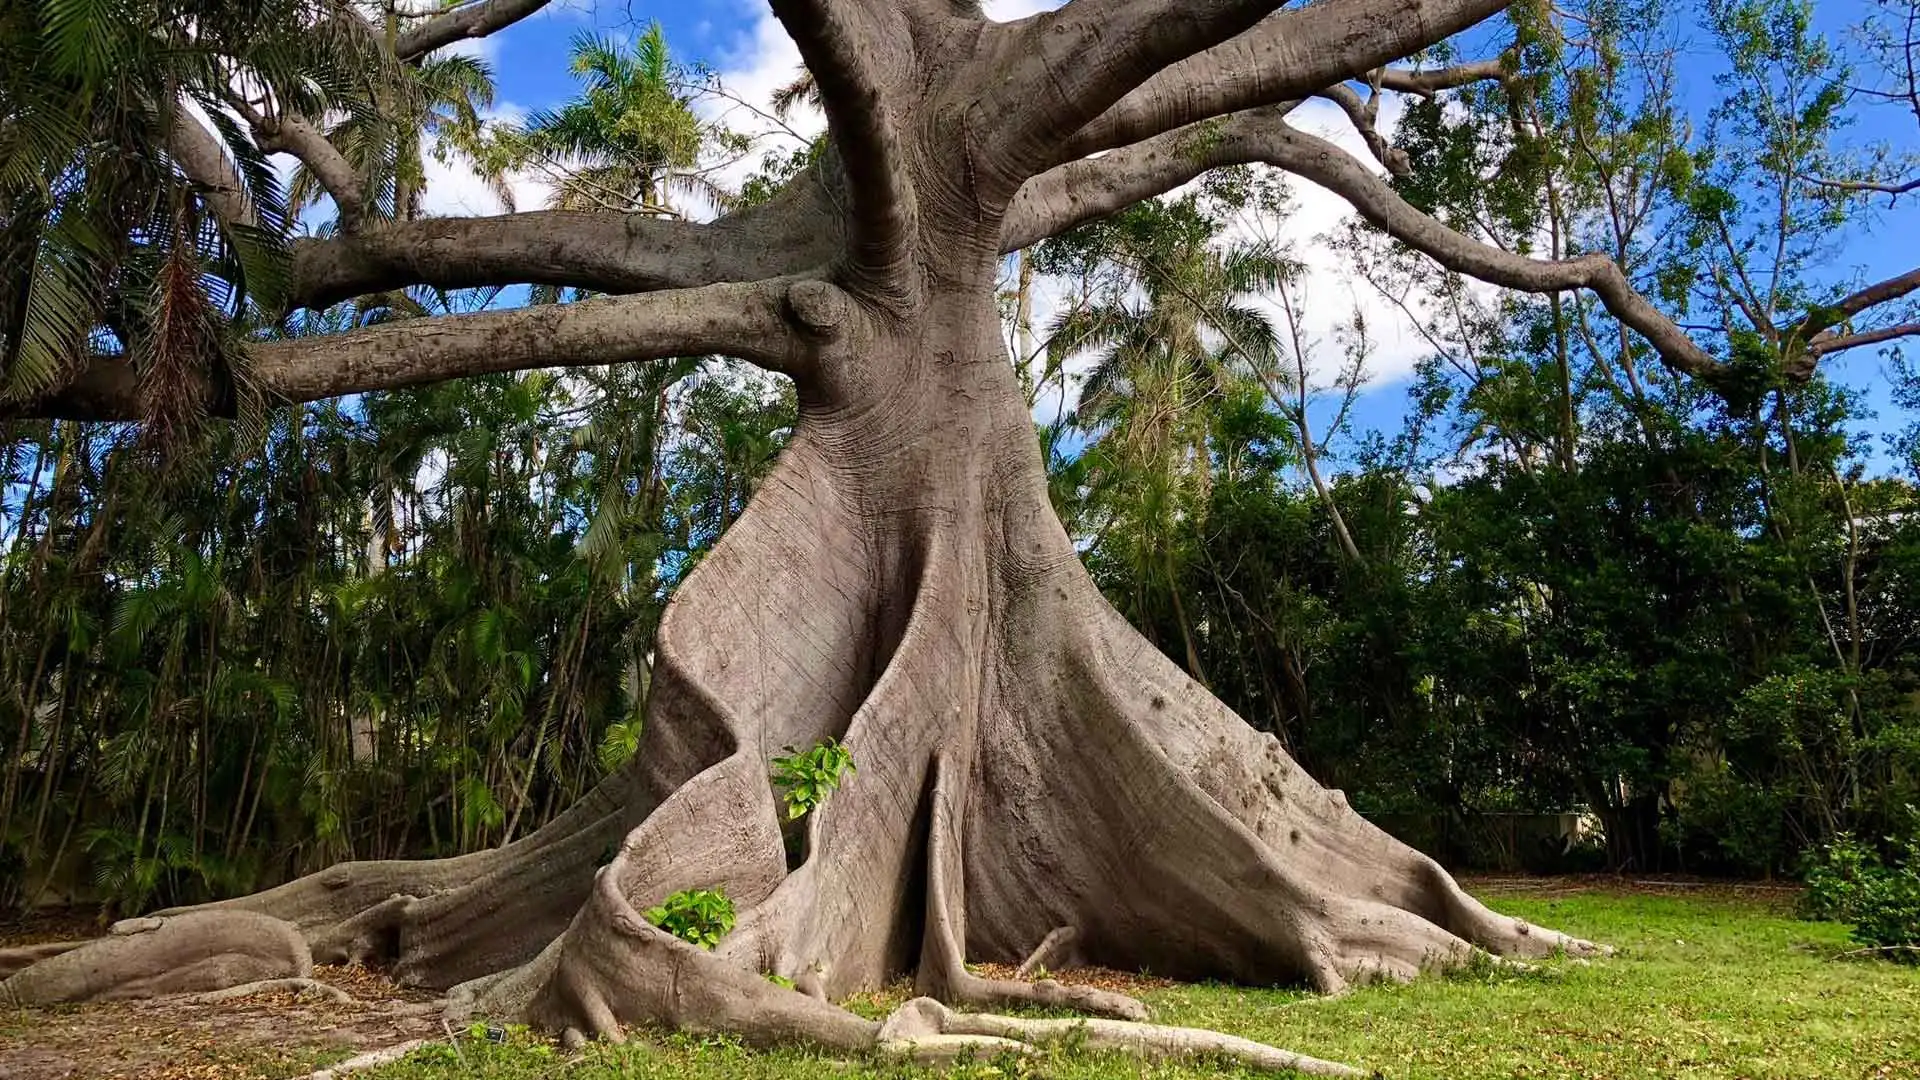 Large tree in the lawn of a residential property in Palm Beach, FL.